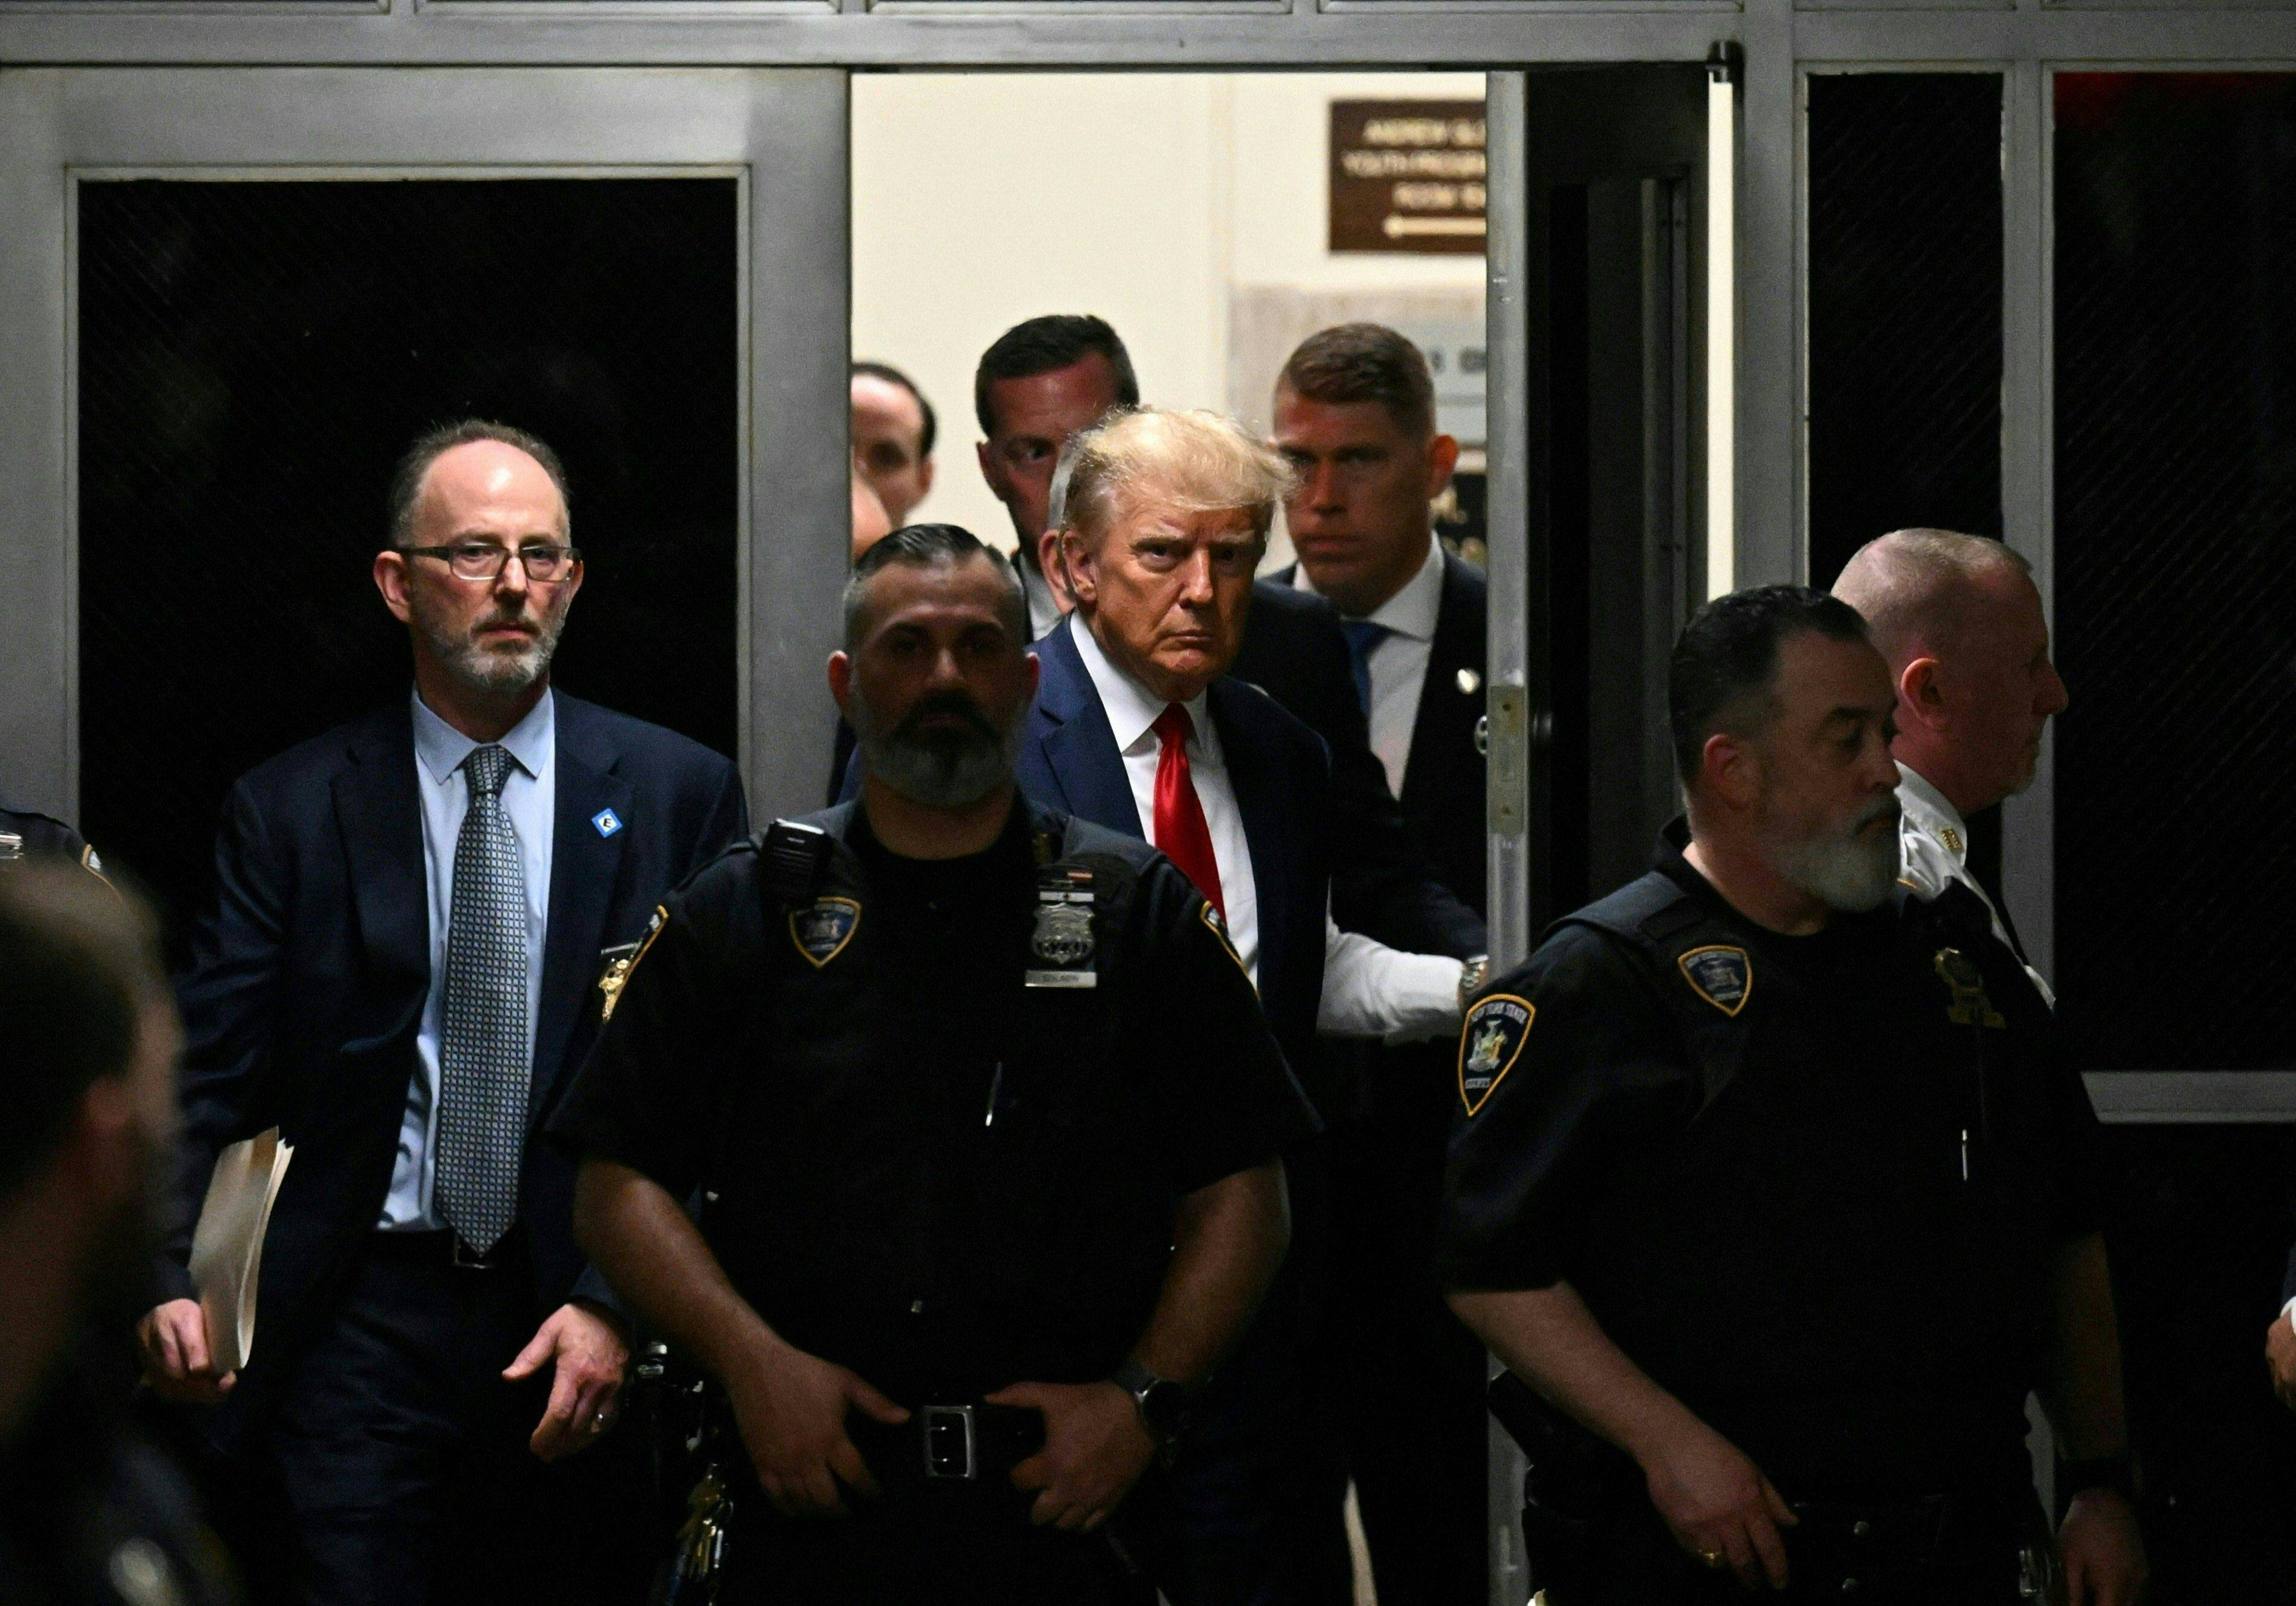 Former US President Donald Trump makes his way inside the Manhattan Criminal Courthouse in New York on April 4. Photo: AFP